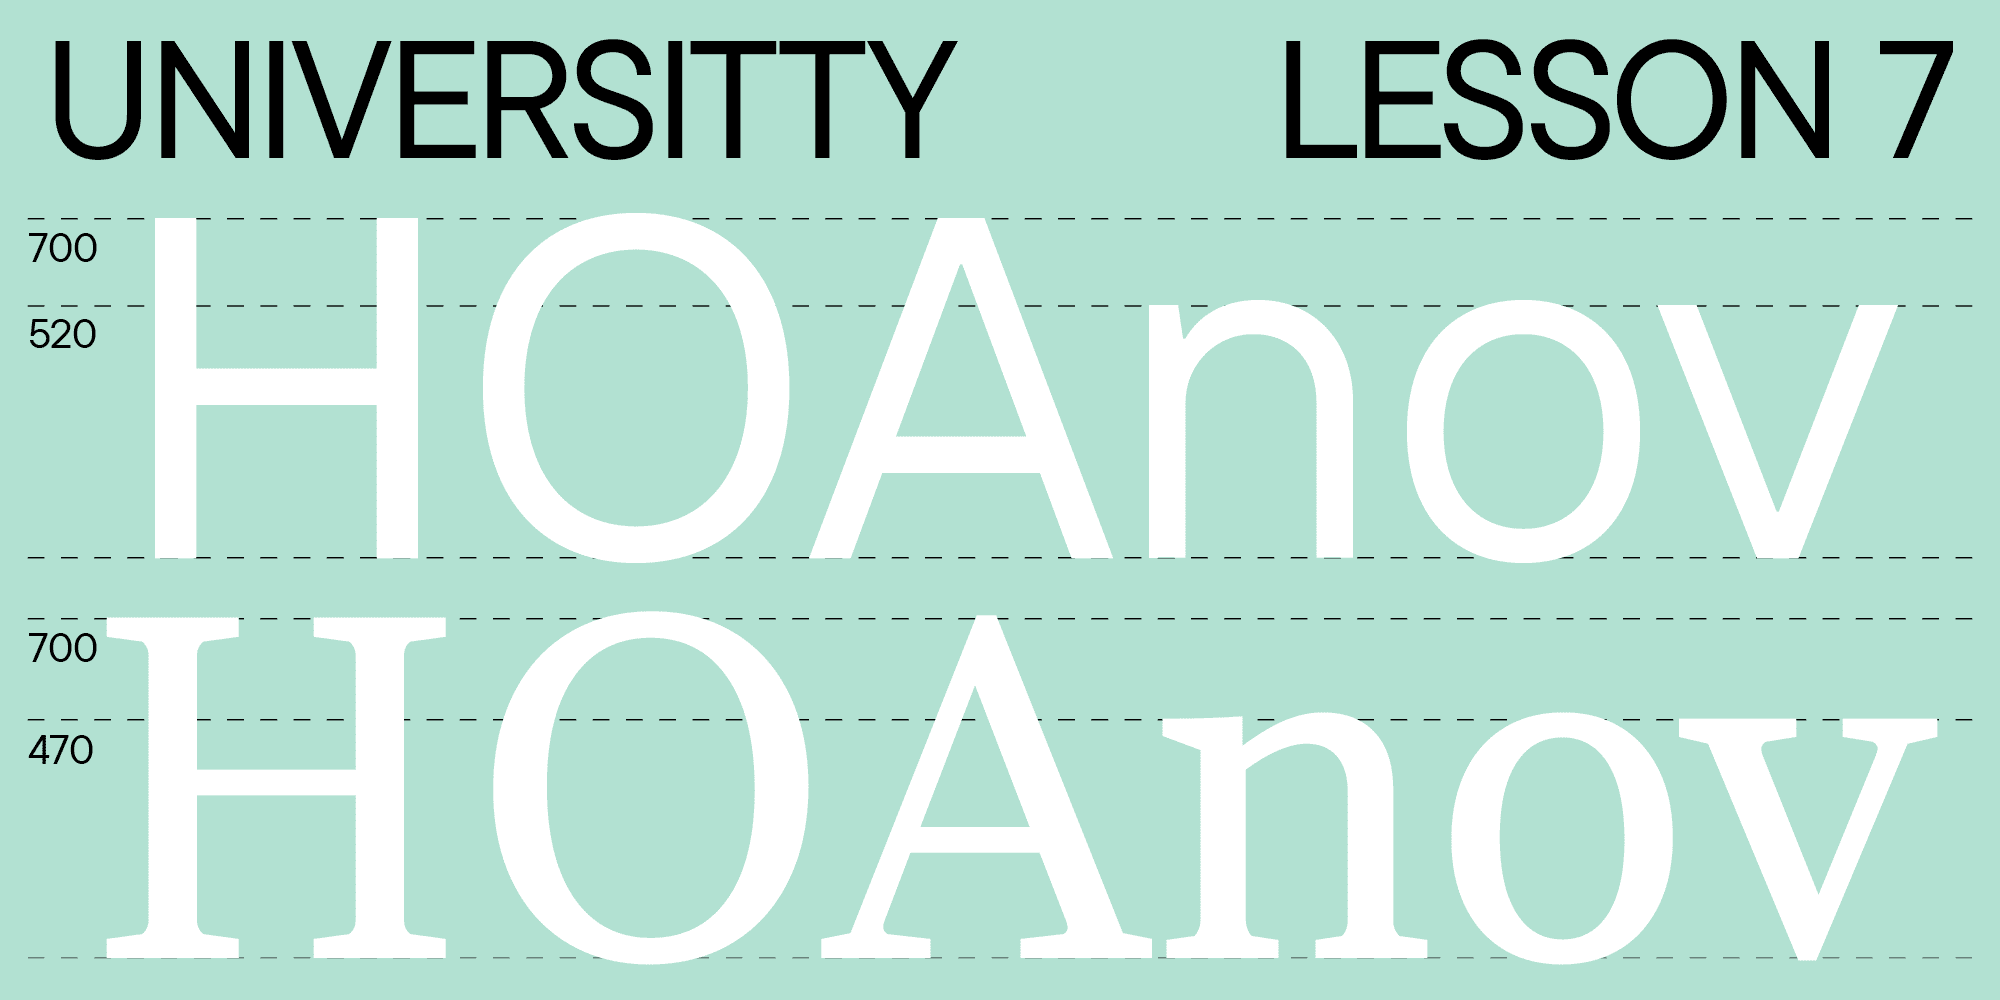 UniversiTTy: Lesson 7. Designing Basic Latin Characters. Glyph Height, Contrast, Optical Sizes